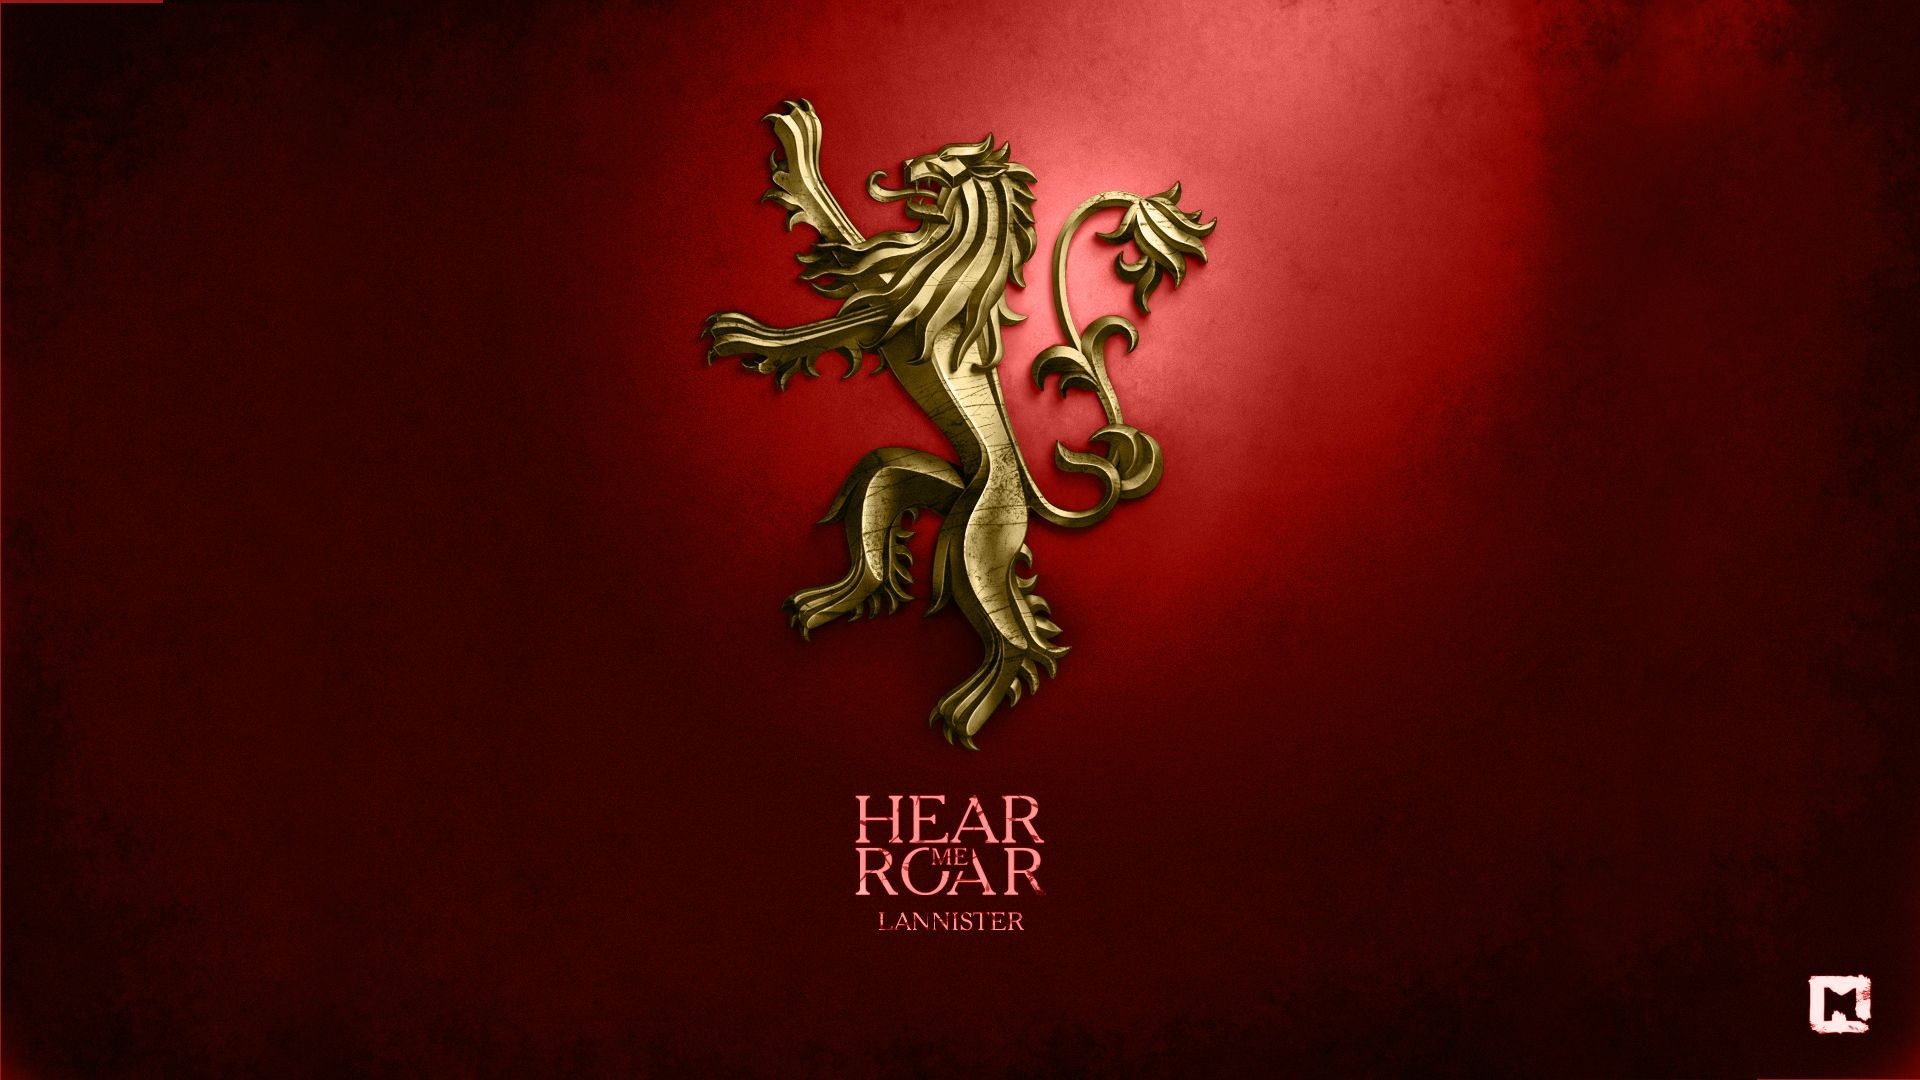 Game Of Thrones A Song Of Ice And Fire Digital Art House Lannister Game Of Thrones House Lannister S 1920x1080